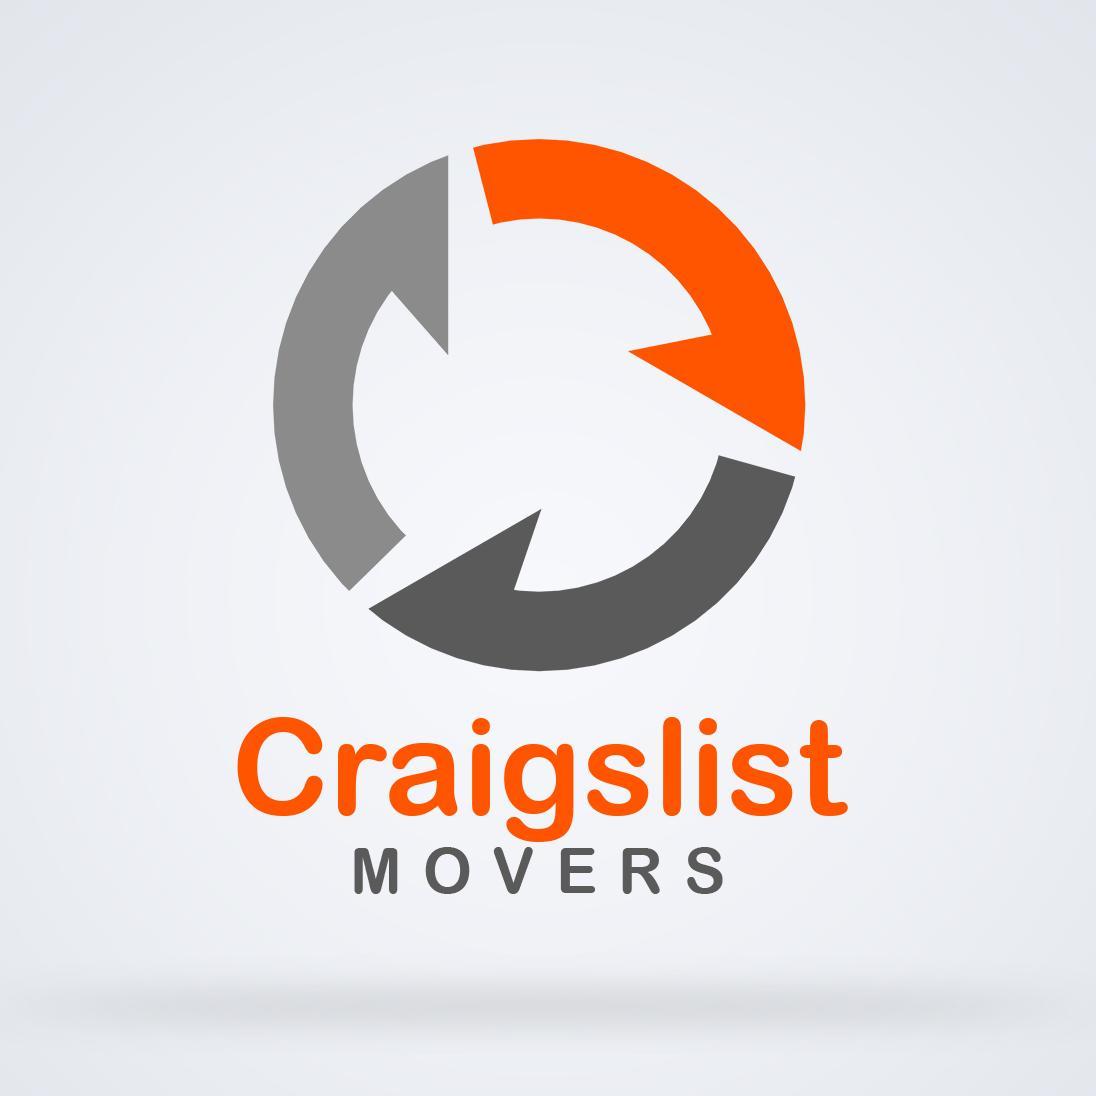 Craigslist mover reviews, advice and tips.